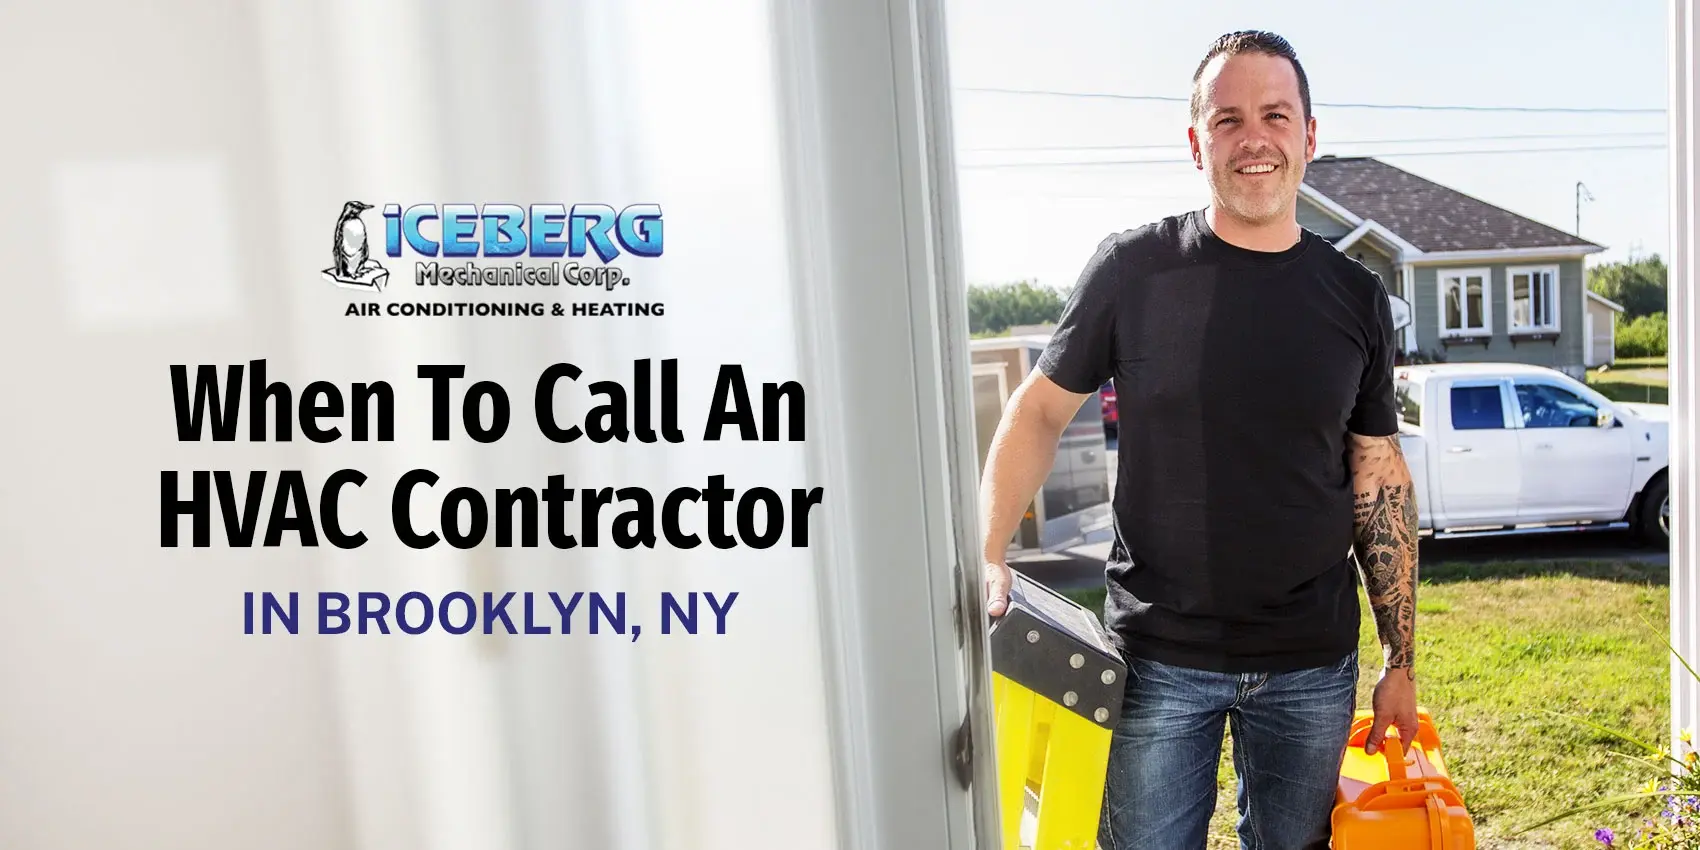 When To Call An HVAC Contractor in Brooklyn, NY